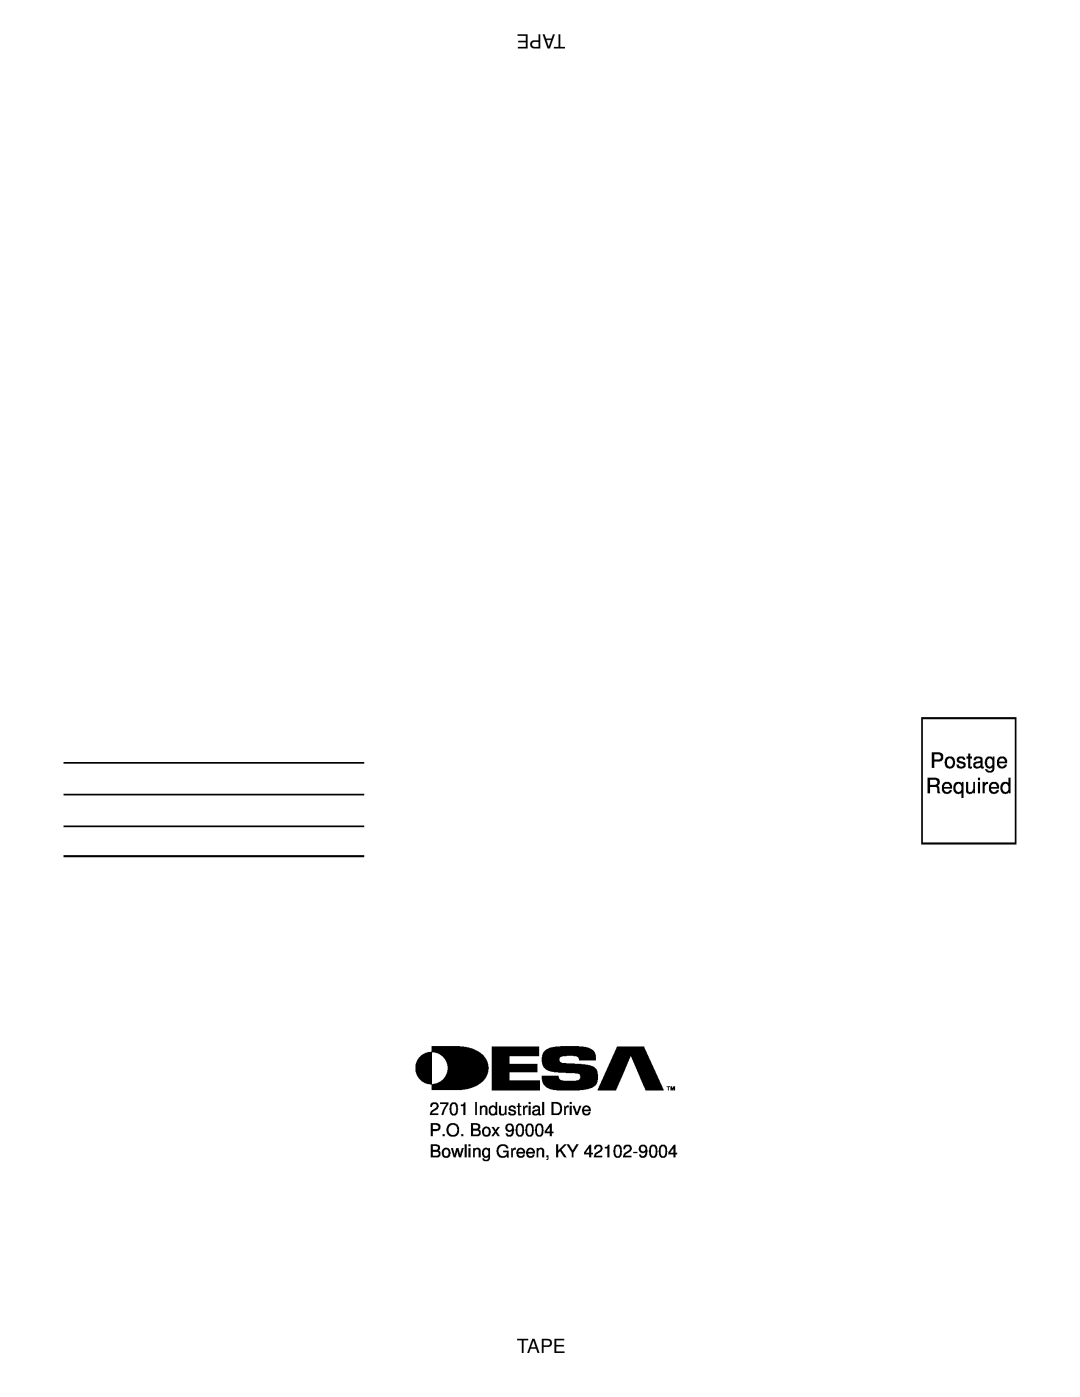 Desa (V)3612ST operating instructions Postage Required, Tape 